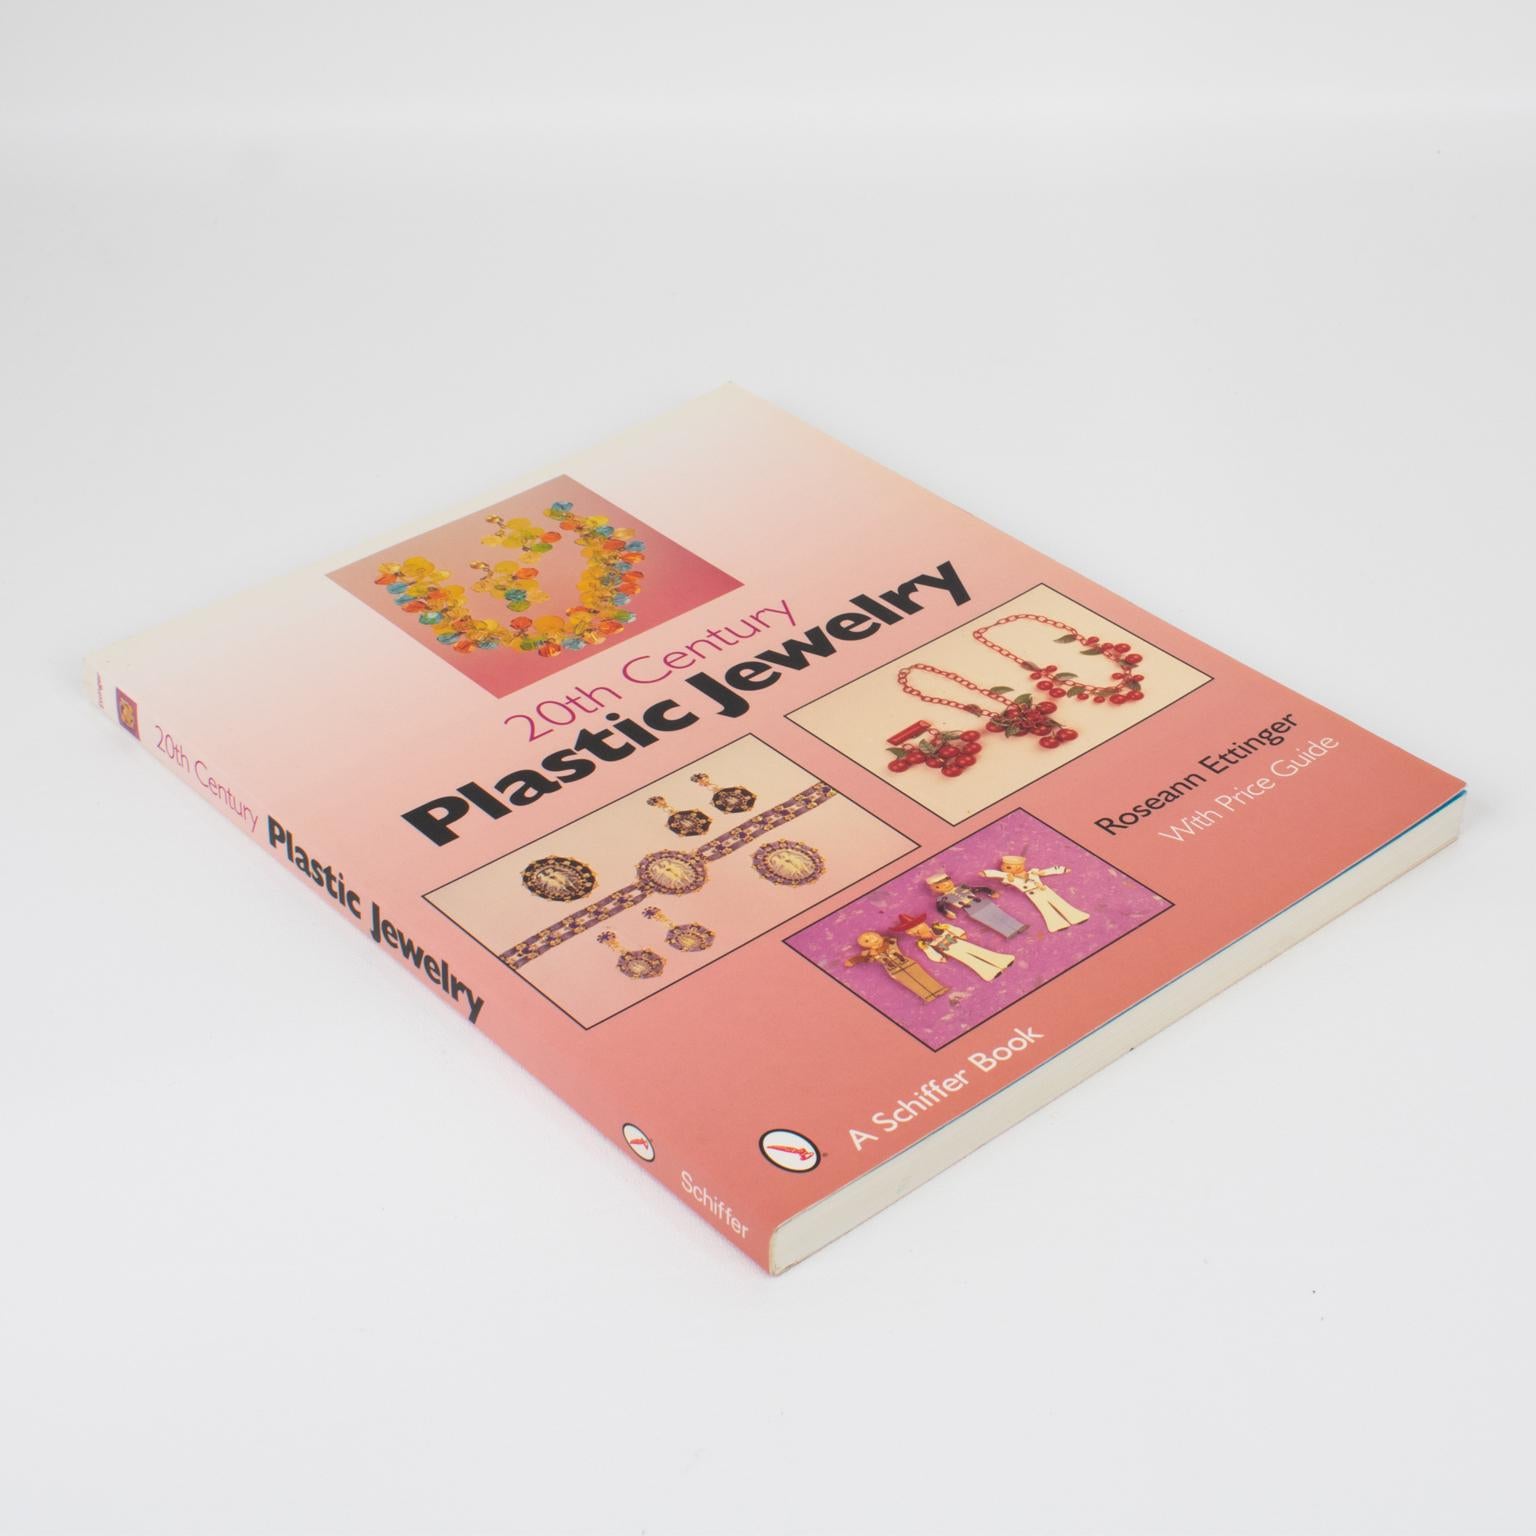 Modern 20th Century Plastic Jewelry, English Book by Roseann Ettinger, 2007 For Sale